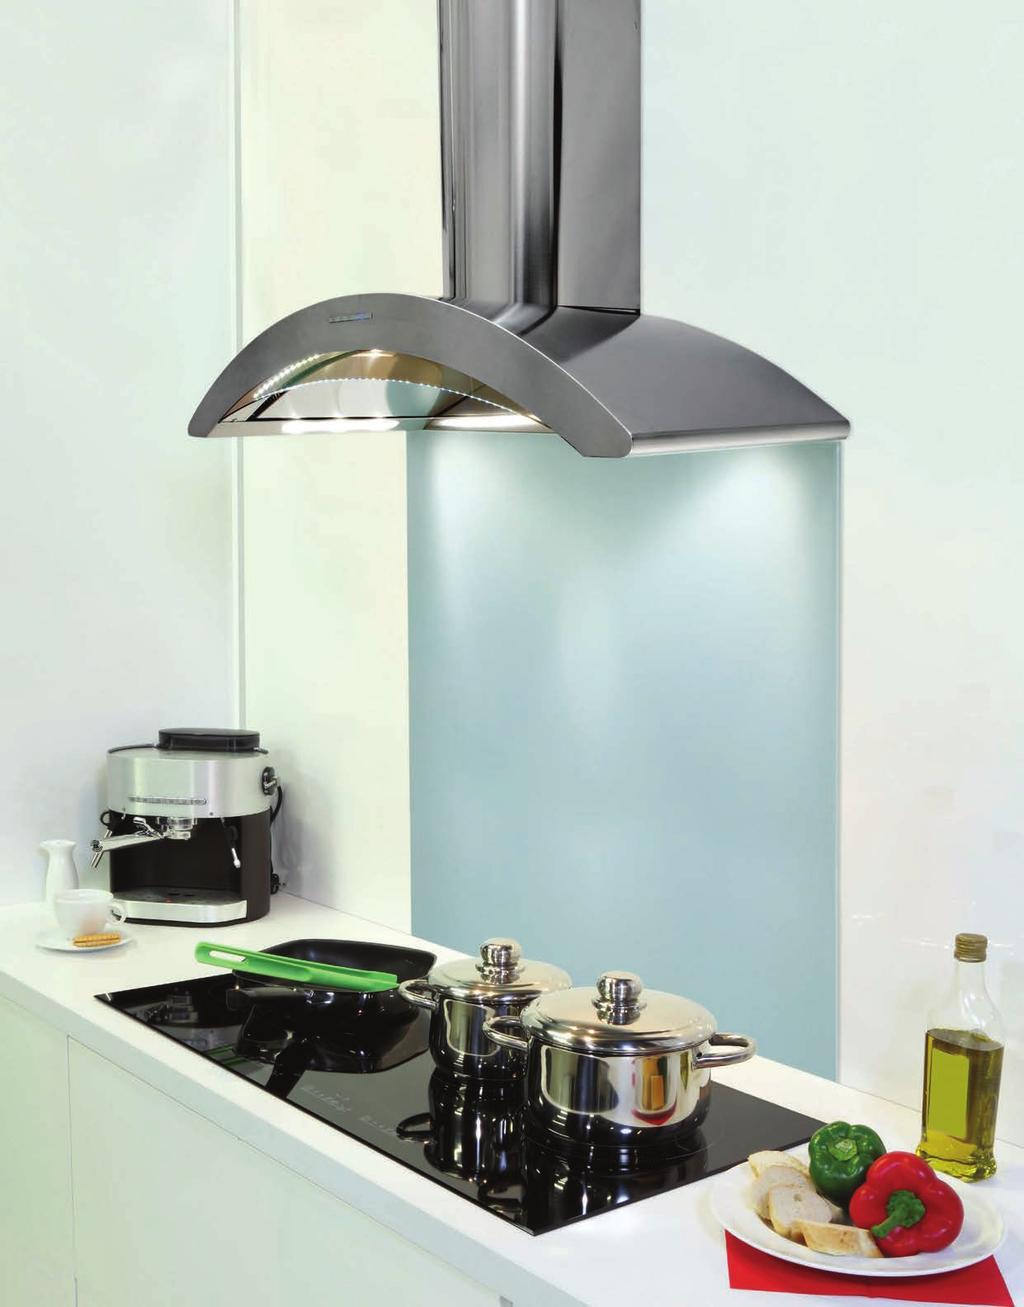 WALL MOUNTED HOODS LA-CRESTA Stainless Steel & Black Hoods The Cresta has a unique curved body and chimney and has some stunning features.